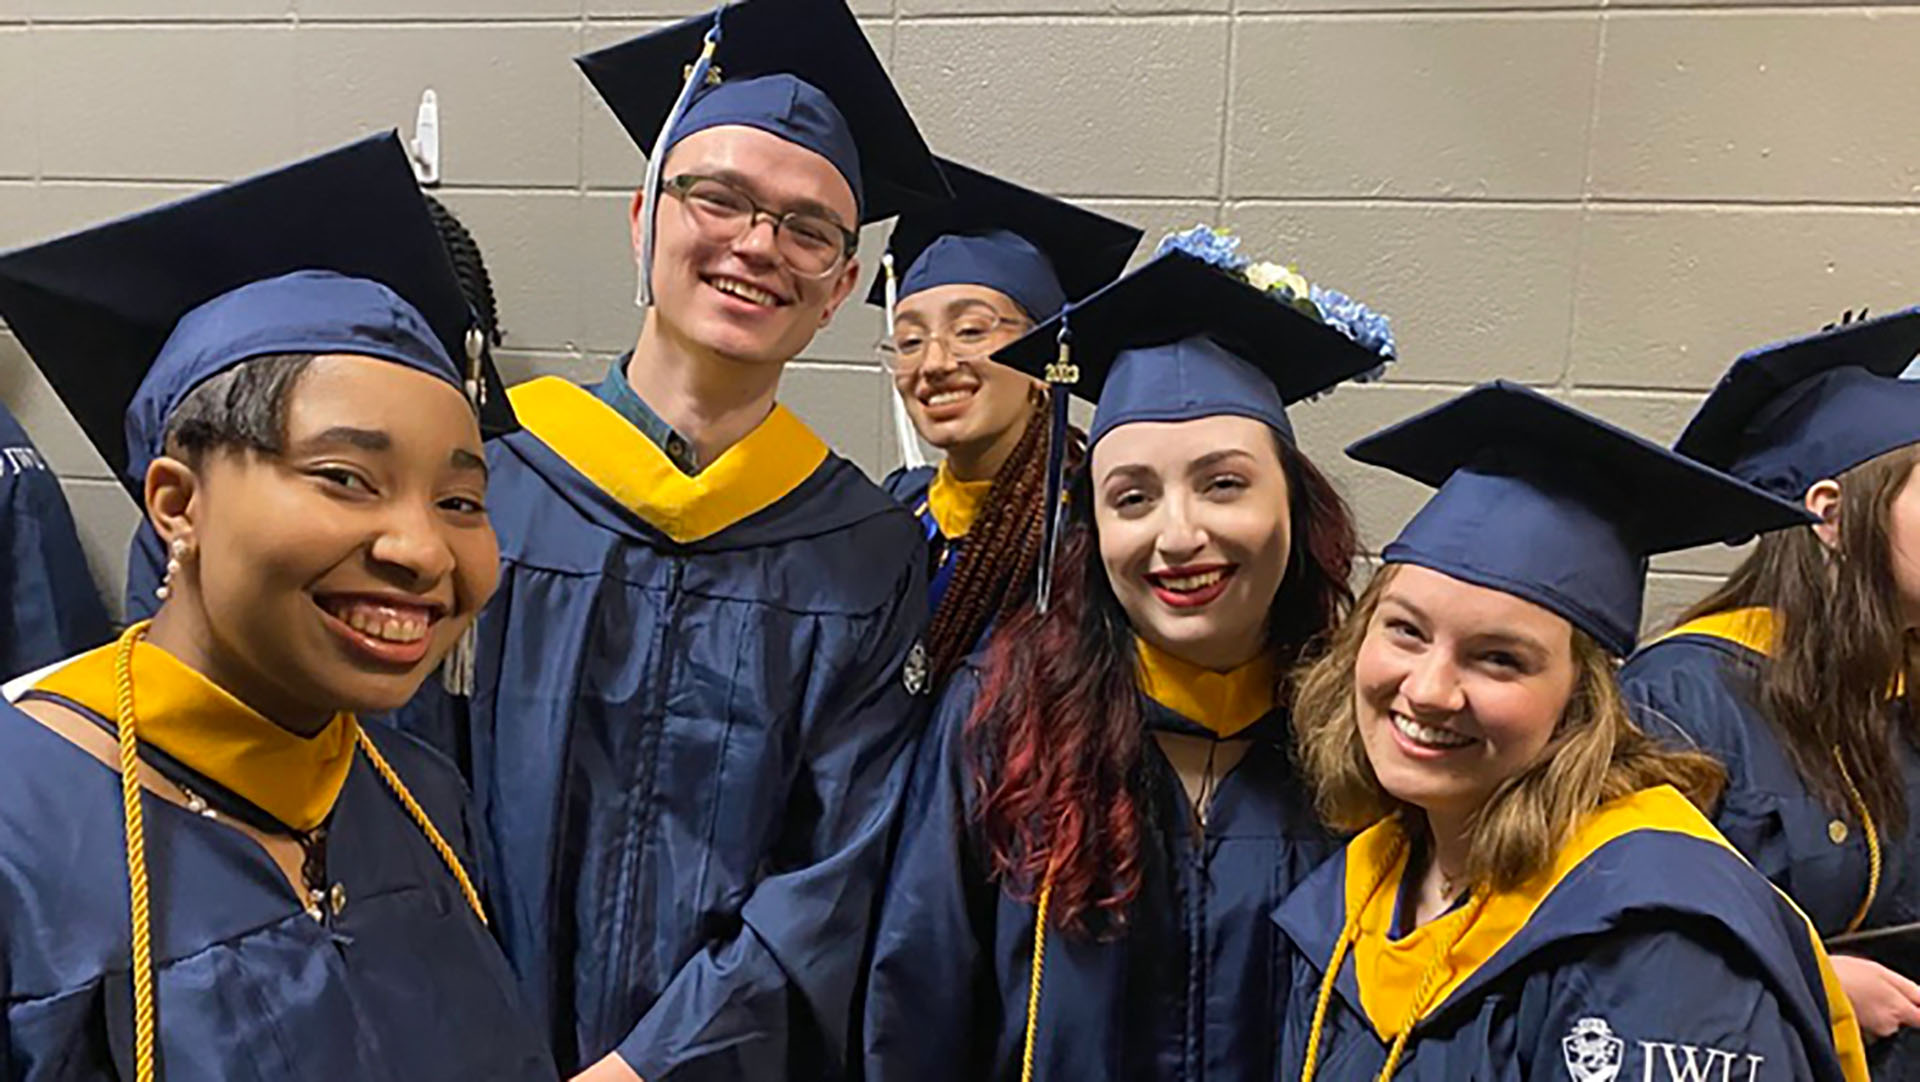 Five JWU students smiling in their graduation caps and gowns